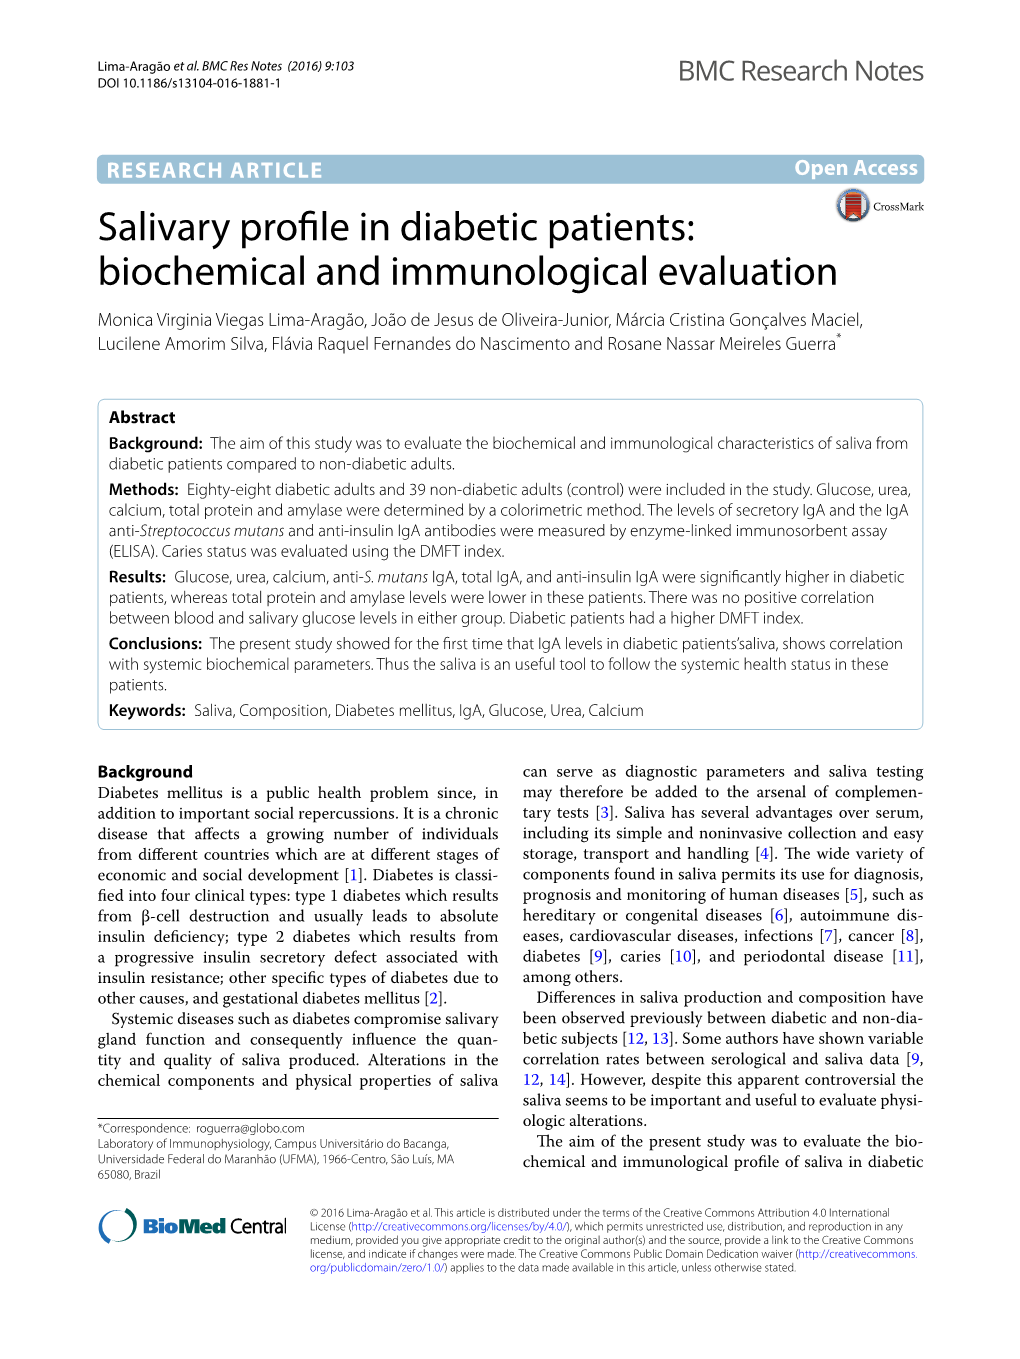 Salivary Profile in Diabetic Patients: Biochemical and Immunological